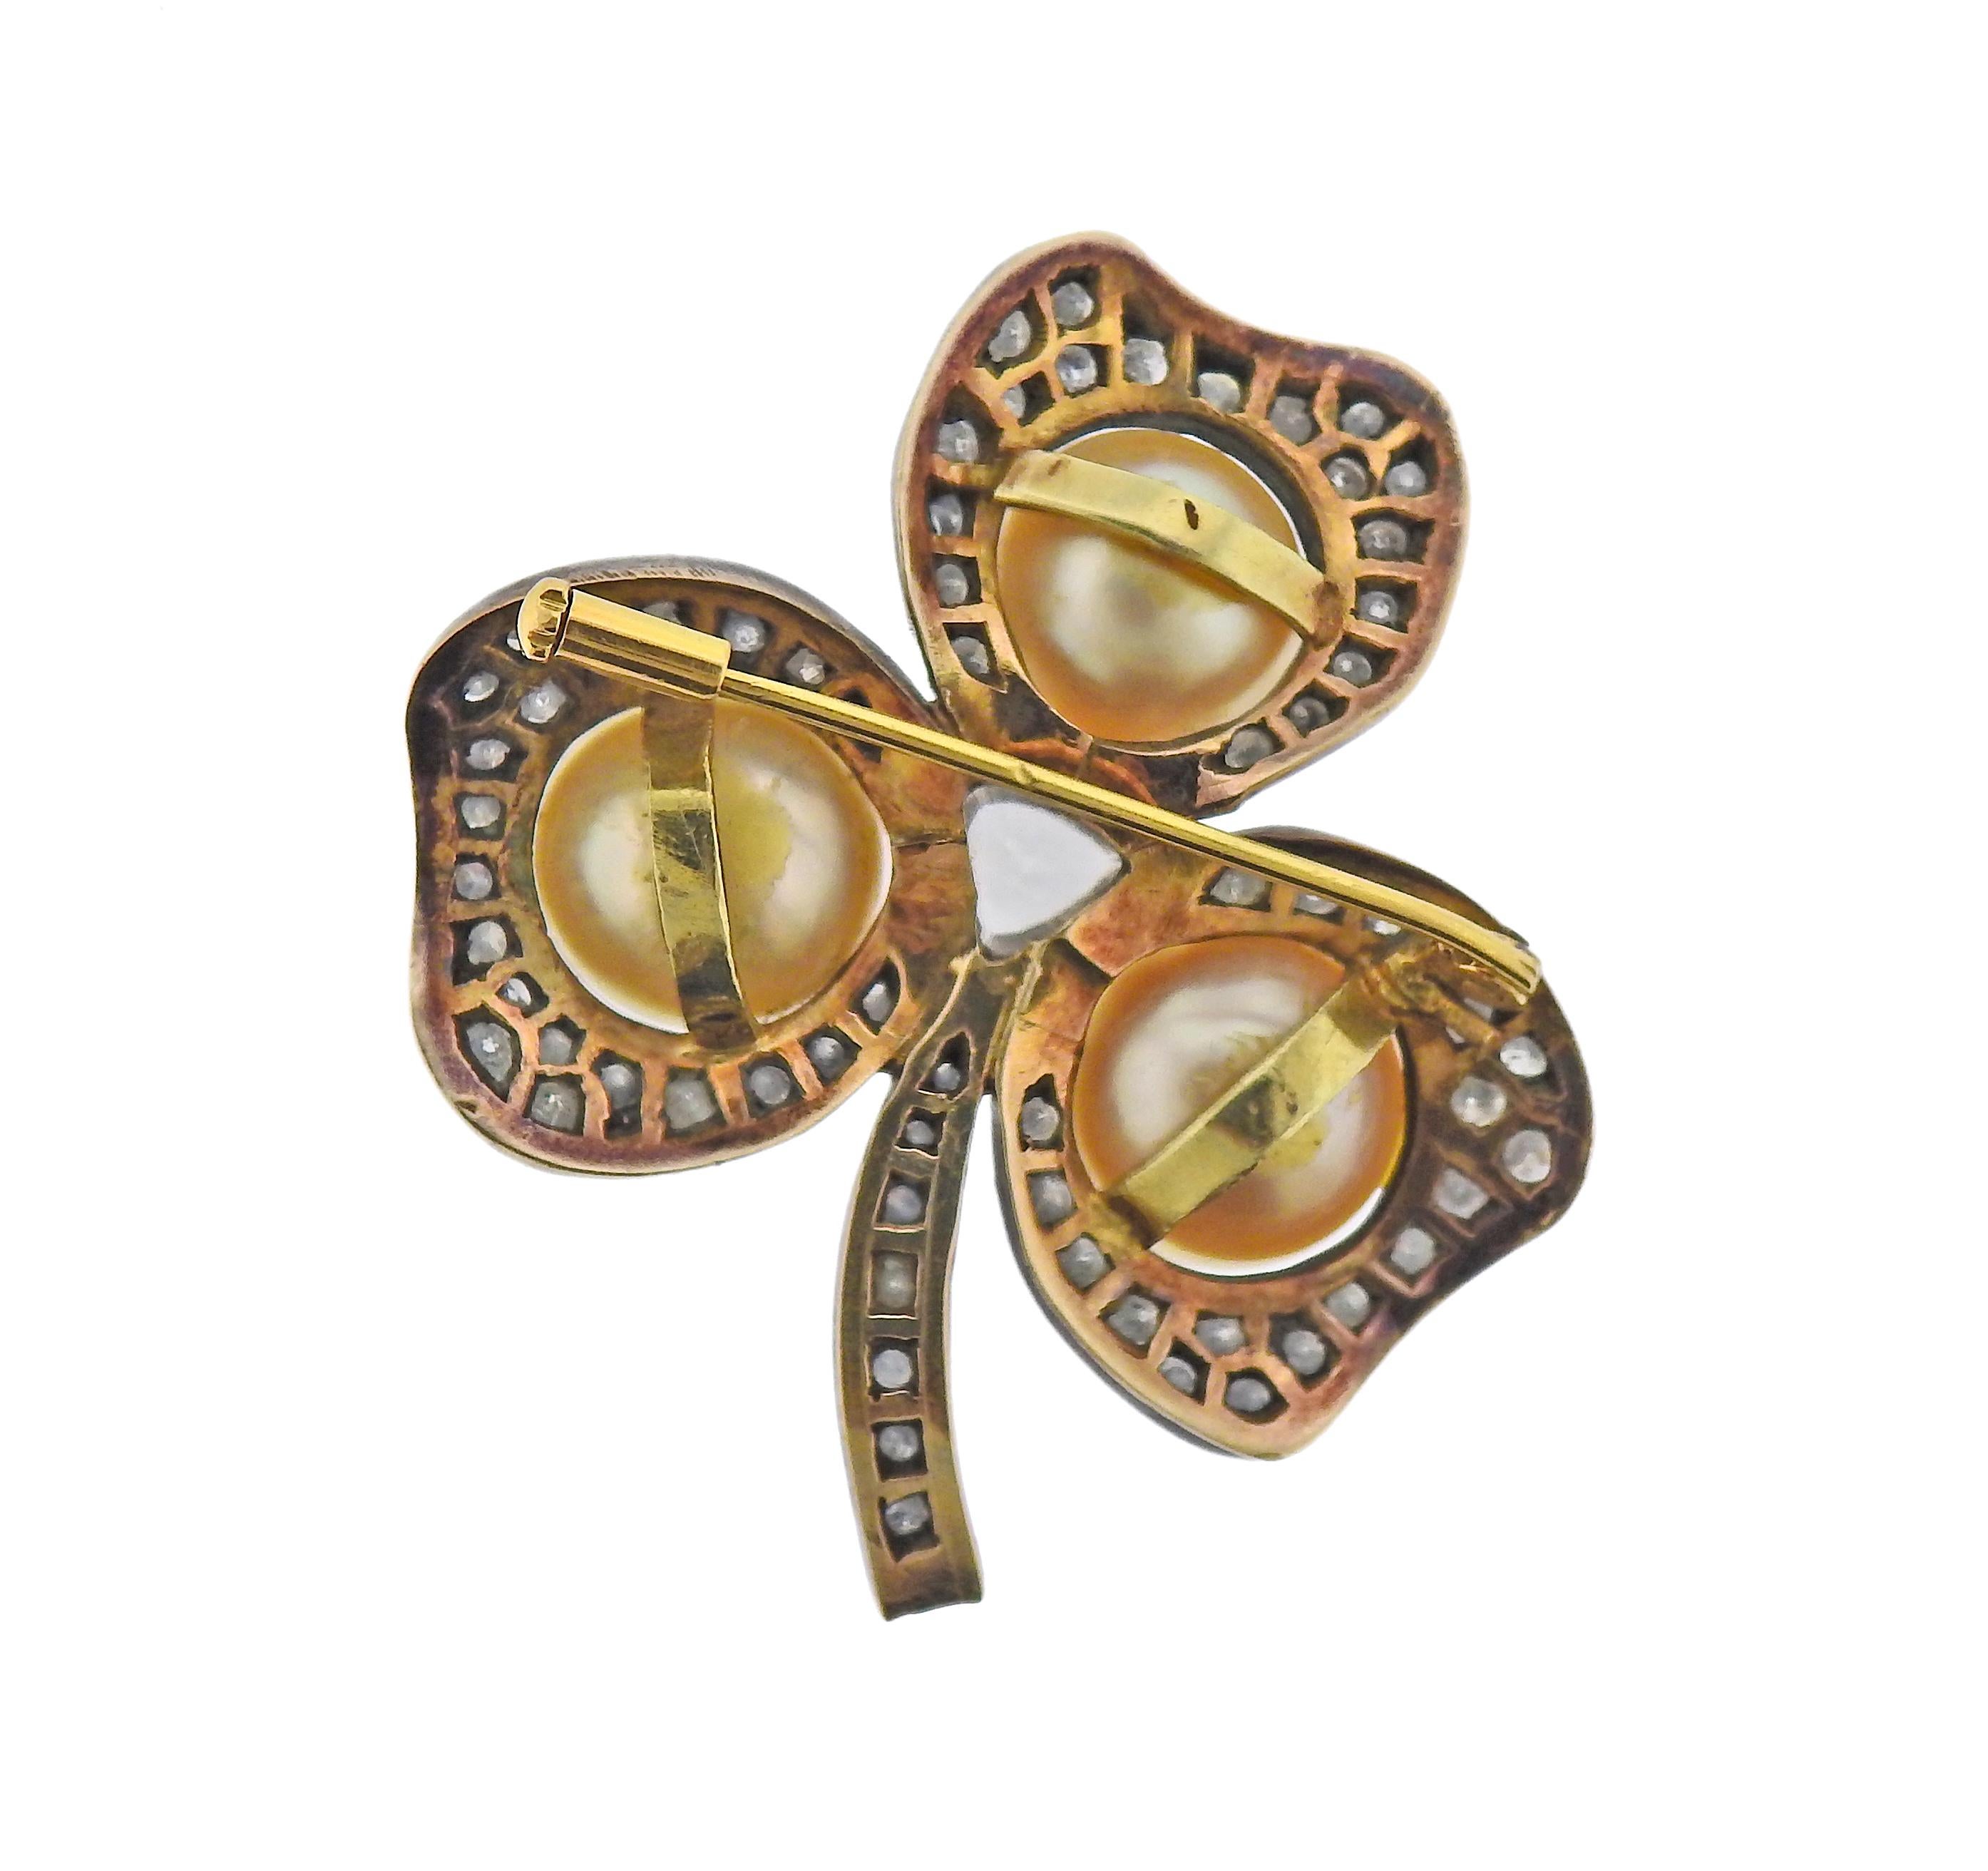 18k gold and silver shamrock brooch, set with three 11.2 - 11.8mm South Sea pearls and approx. 1.80ctw in diamonds. Brooch is 50mm x 45nn. Weight - 20.5 grams. 